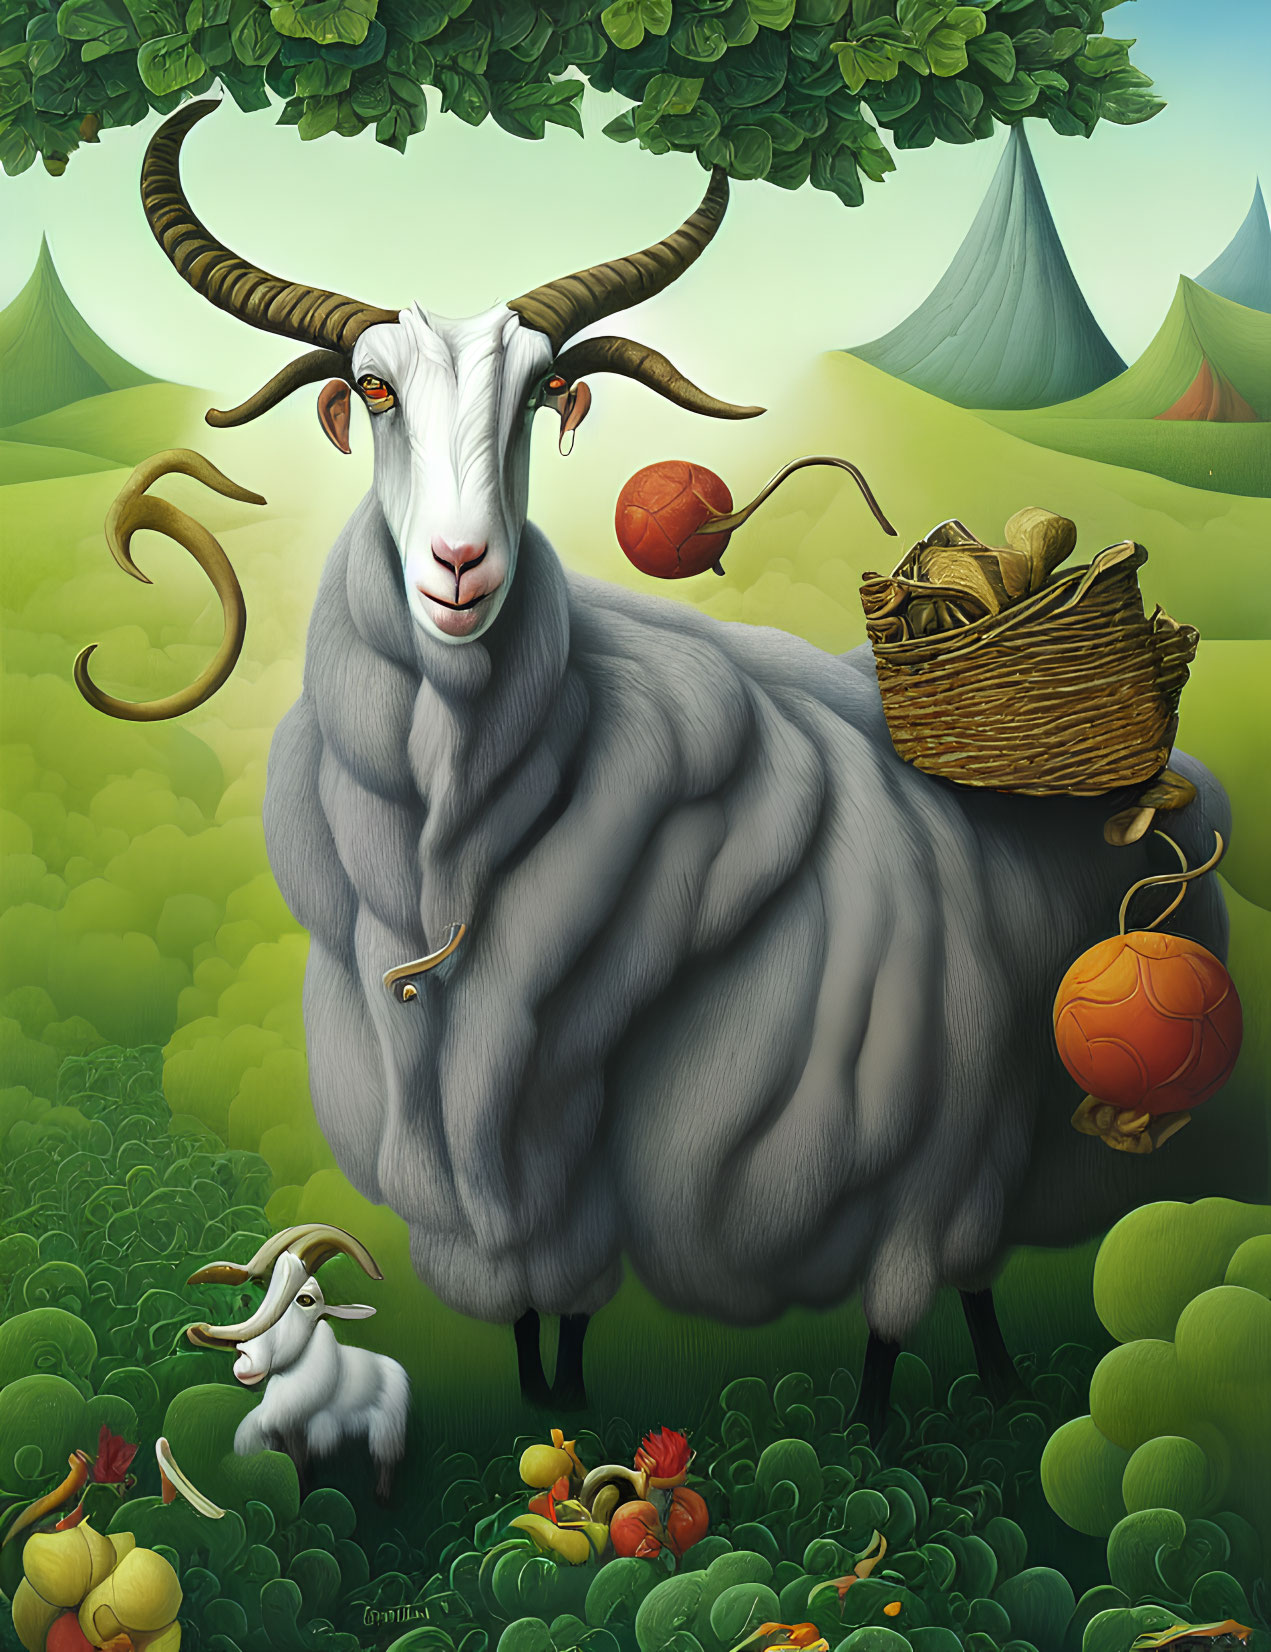 Stylized illustration of white goat with horns in green landscape